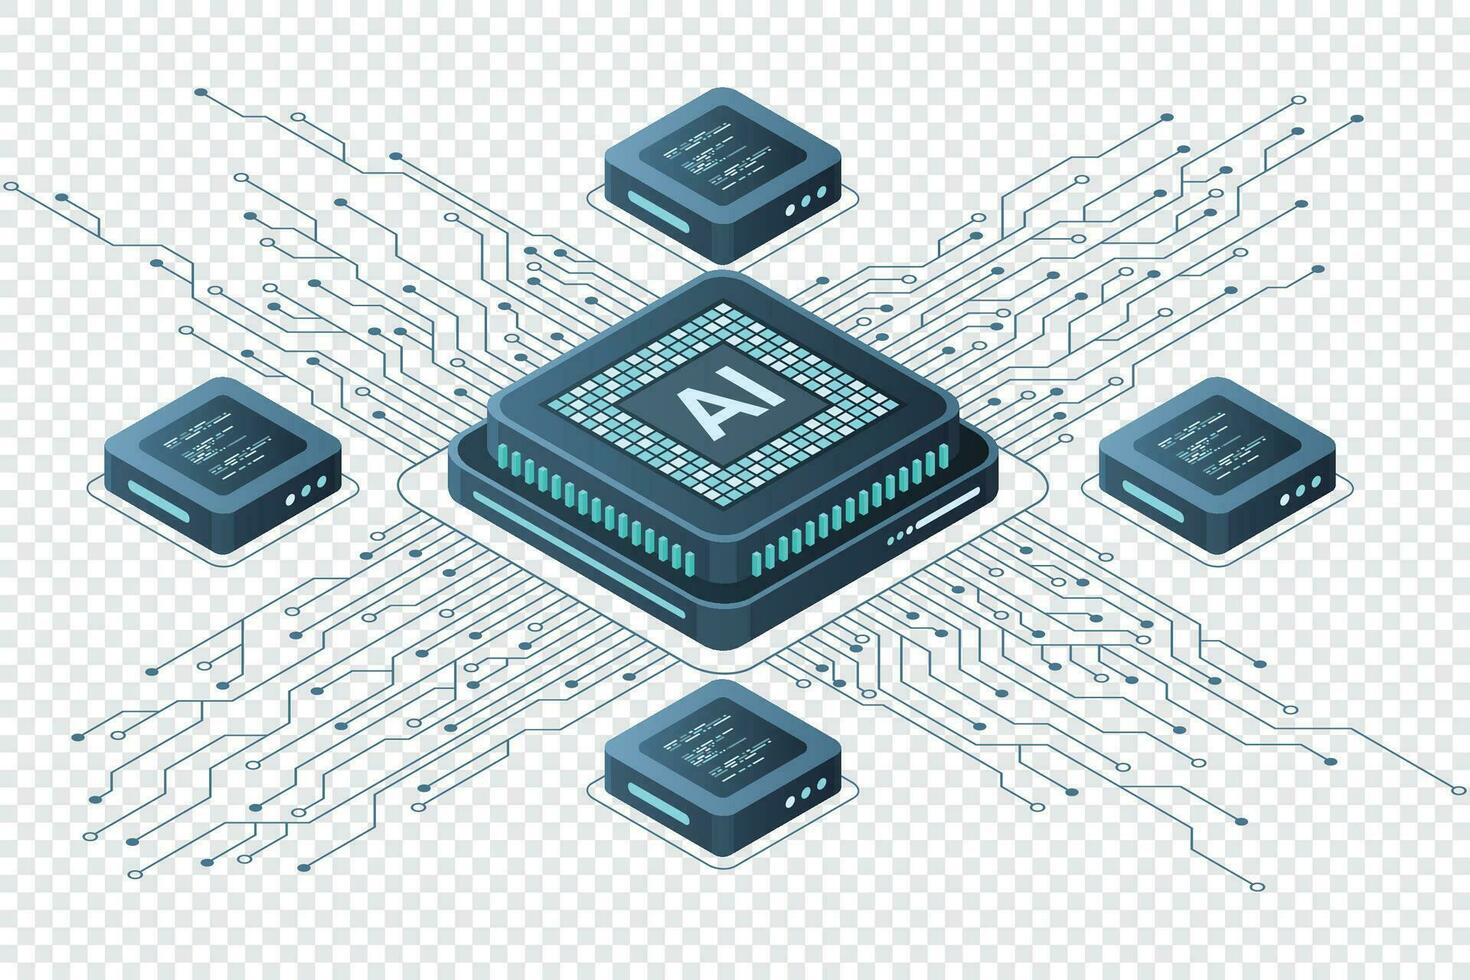 Isometric artificial intelligence chip concept. Artificial intelligence concept. Futuristic microchip processor. Vector illustration